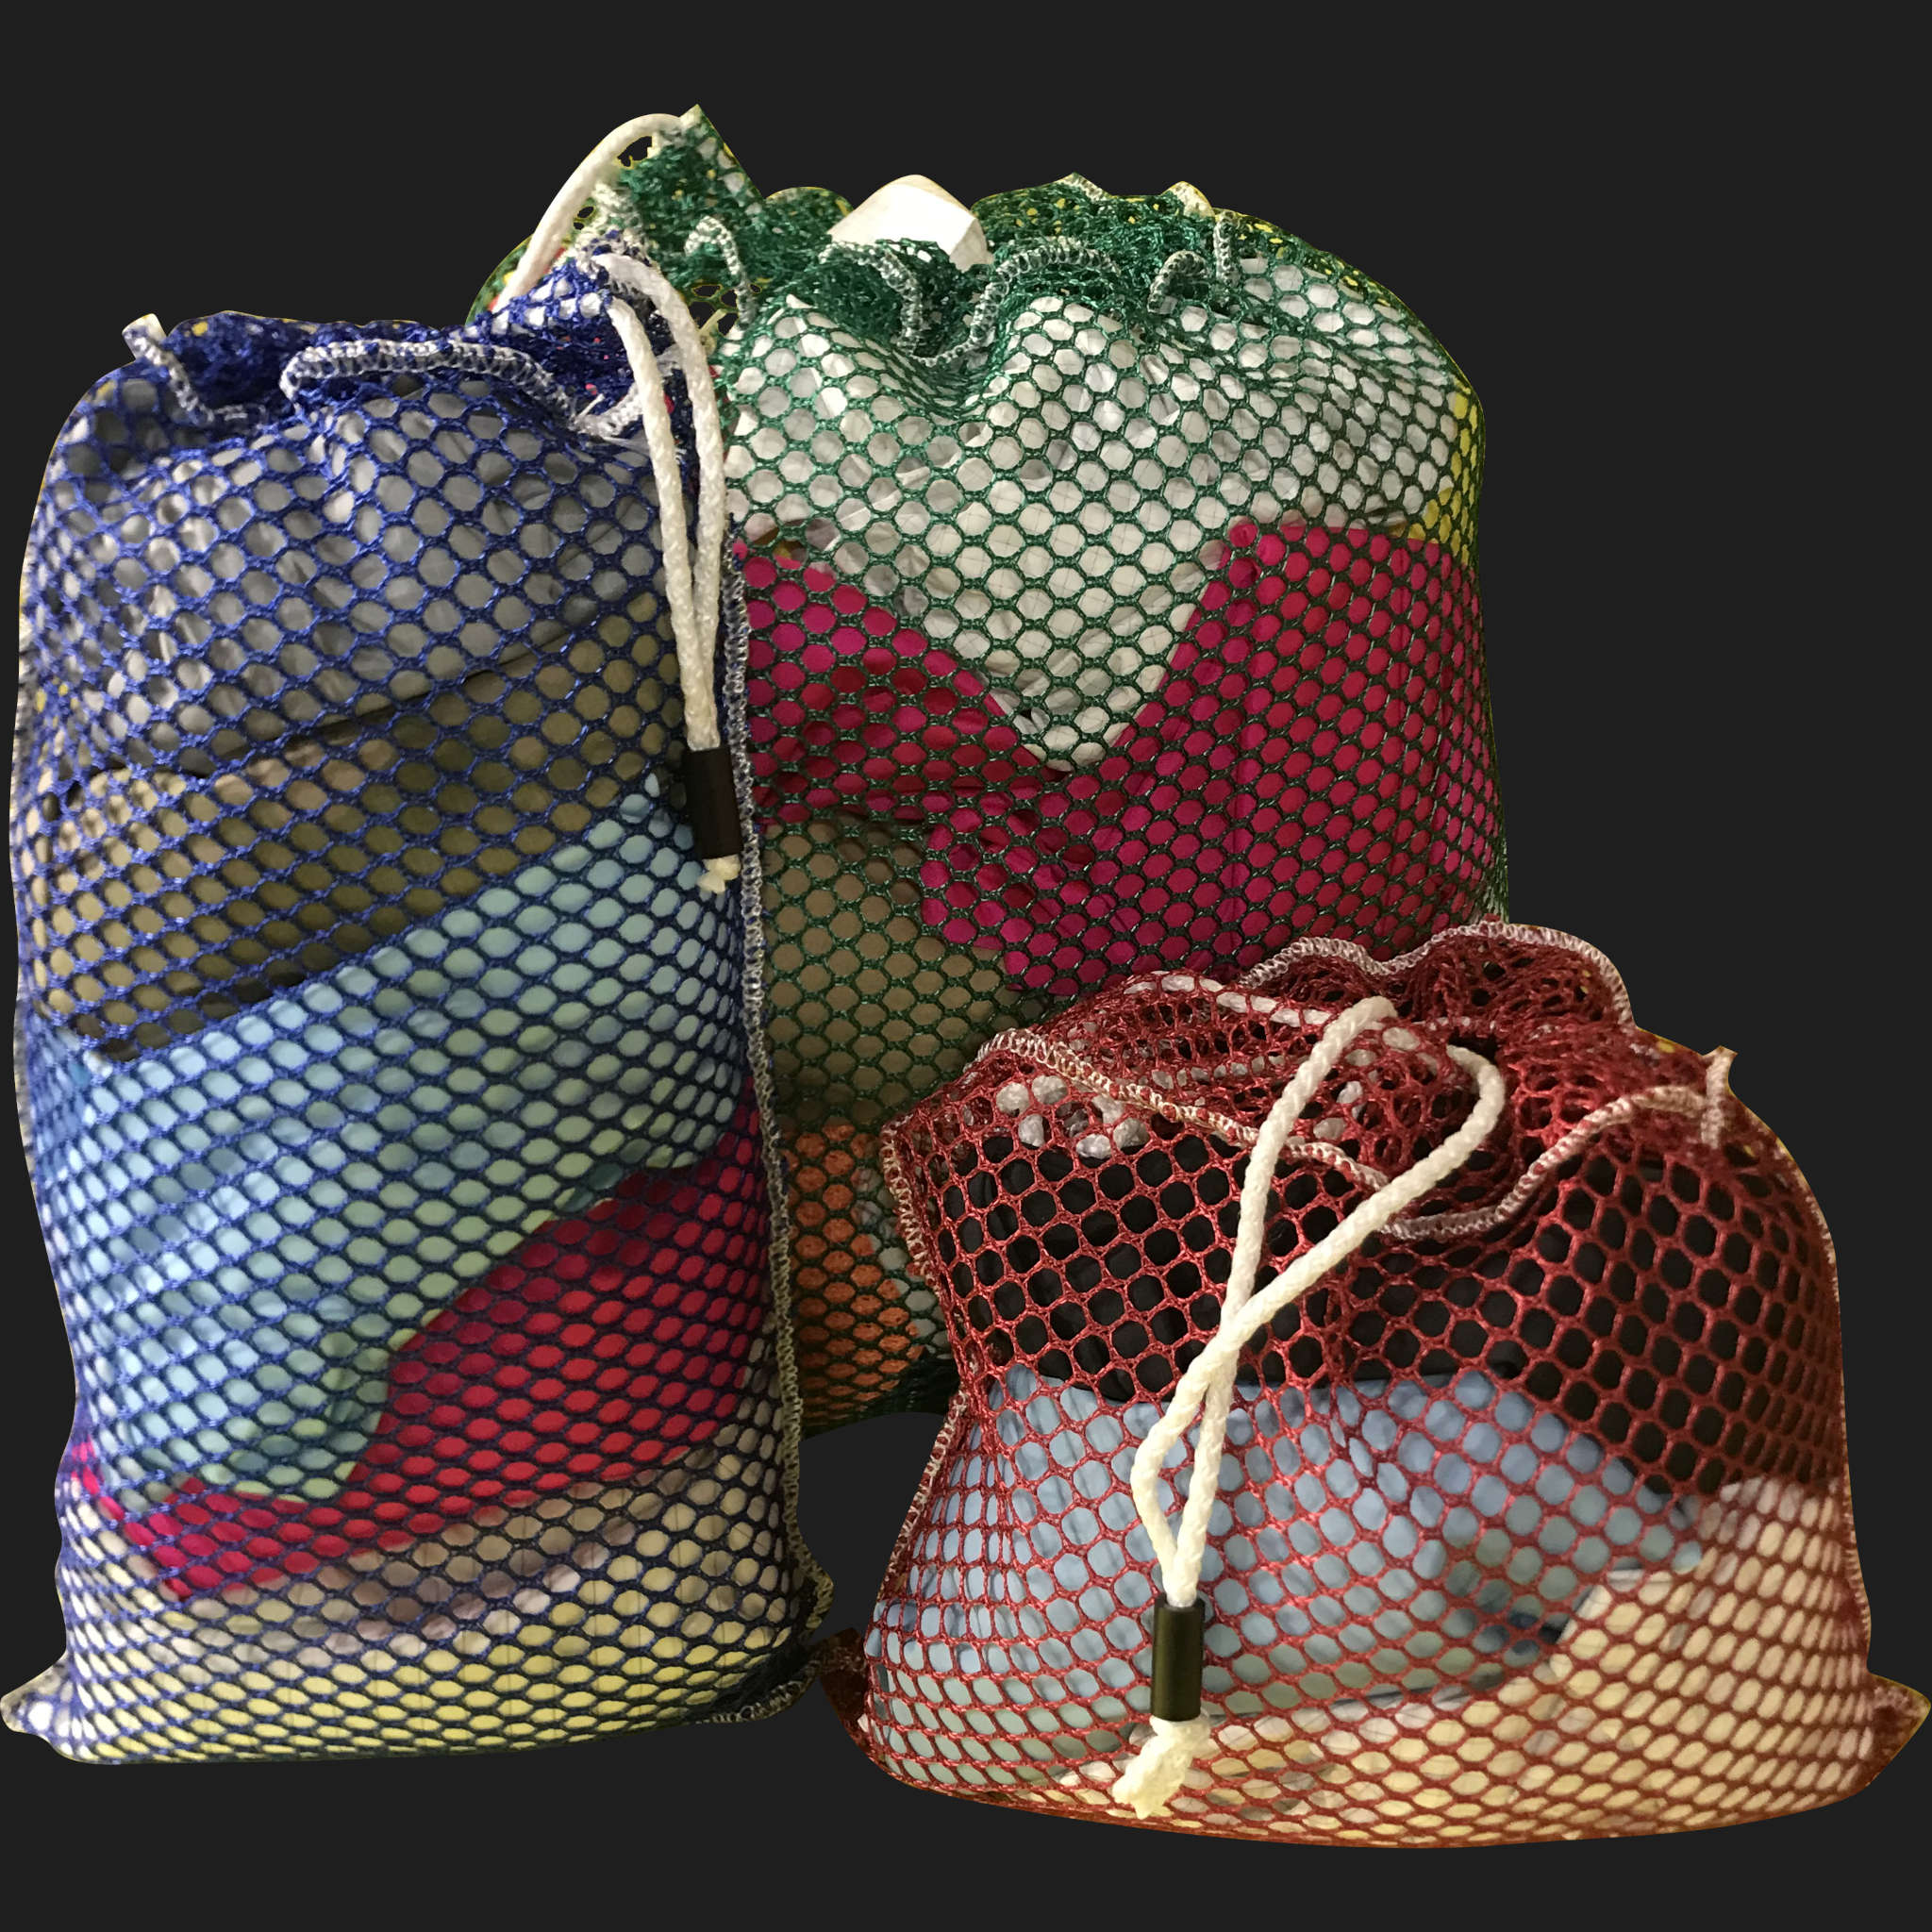 22" x 32" Customized Mesh-Net-Laundry Bags Heavy Duty with Cord and barrellock closure